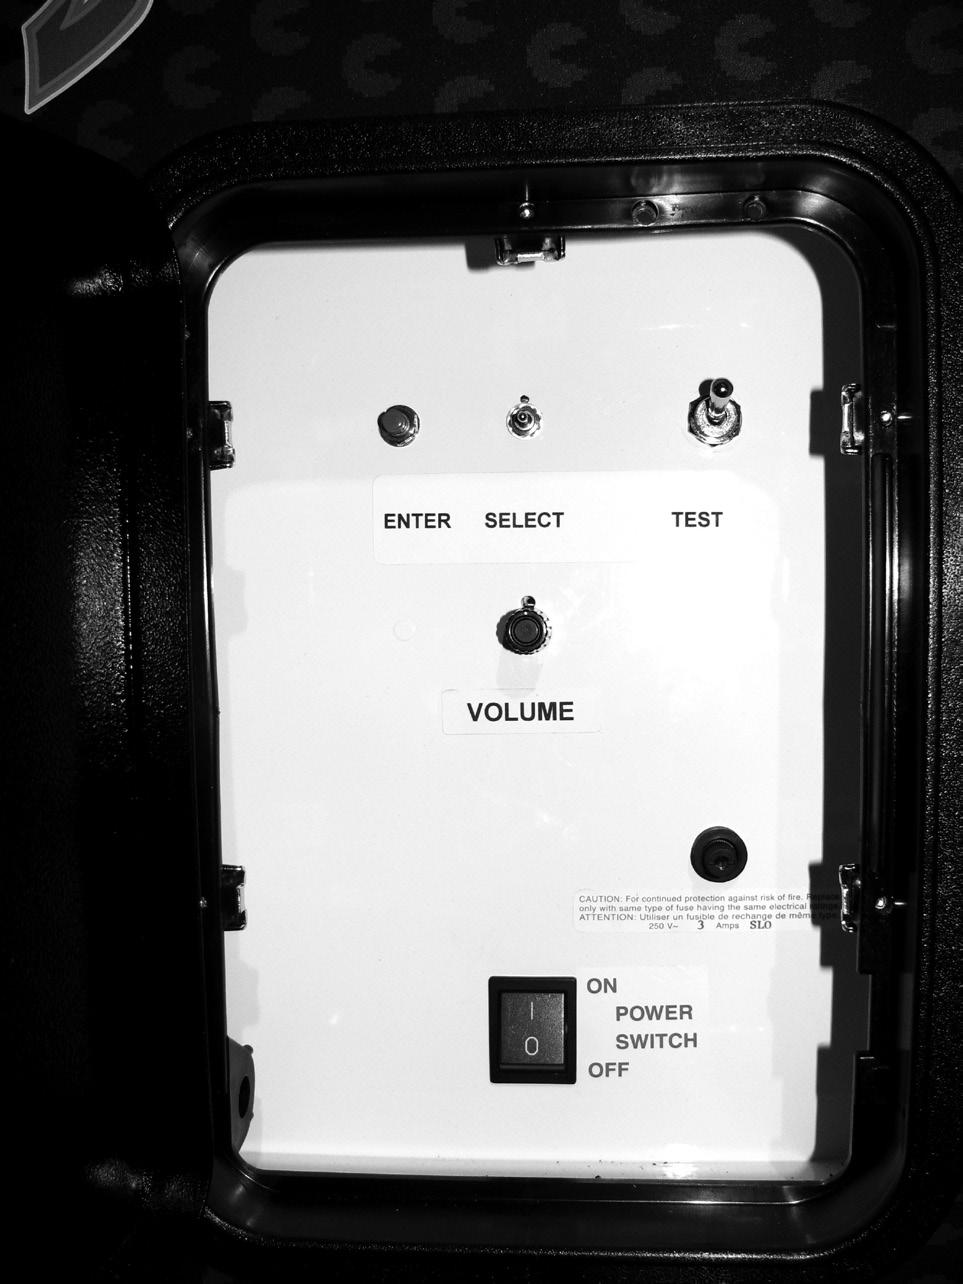 Operator s Manual 4.0 TEST MODE Located behind the front door, are access controls to the test mode.